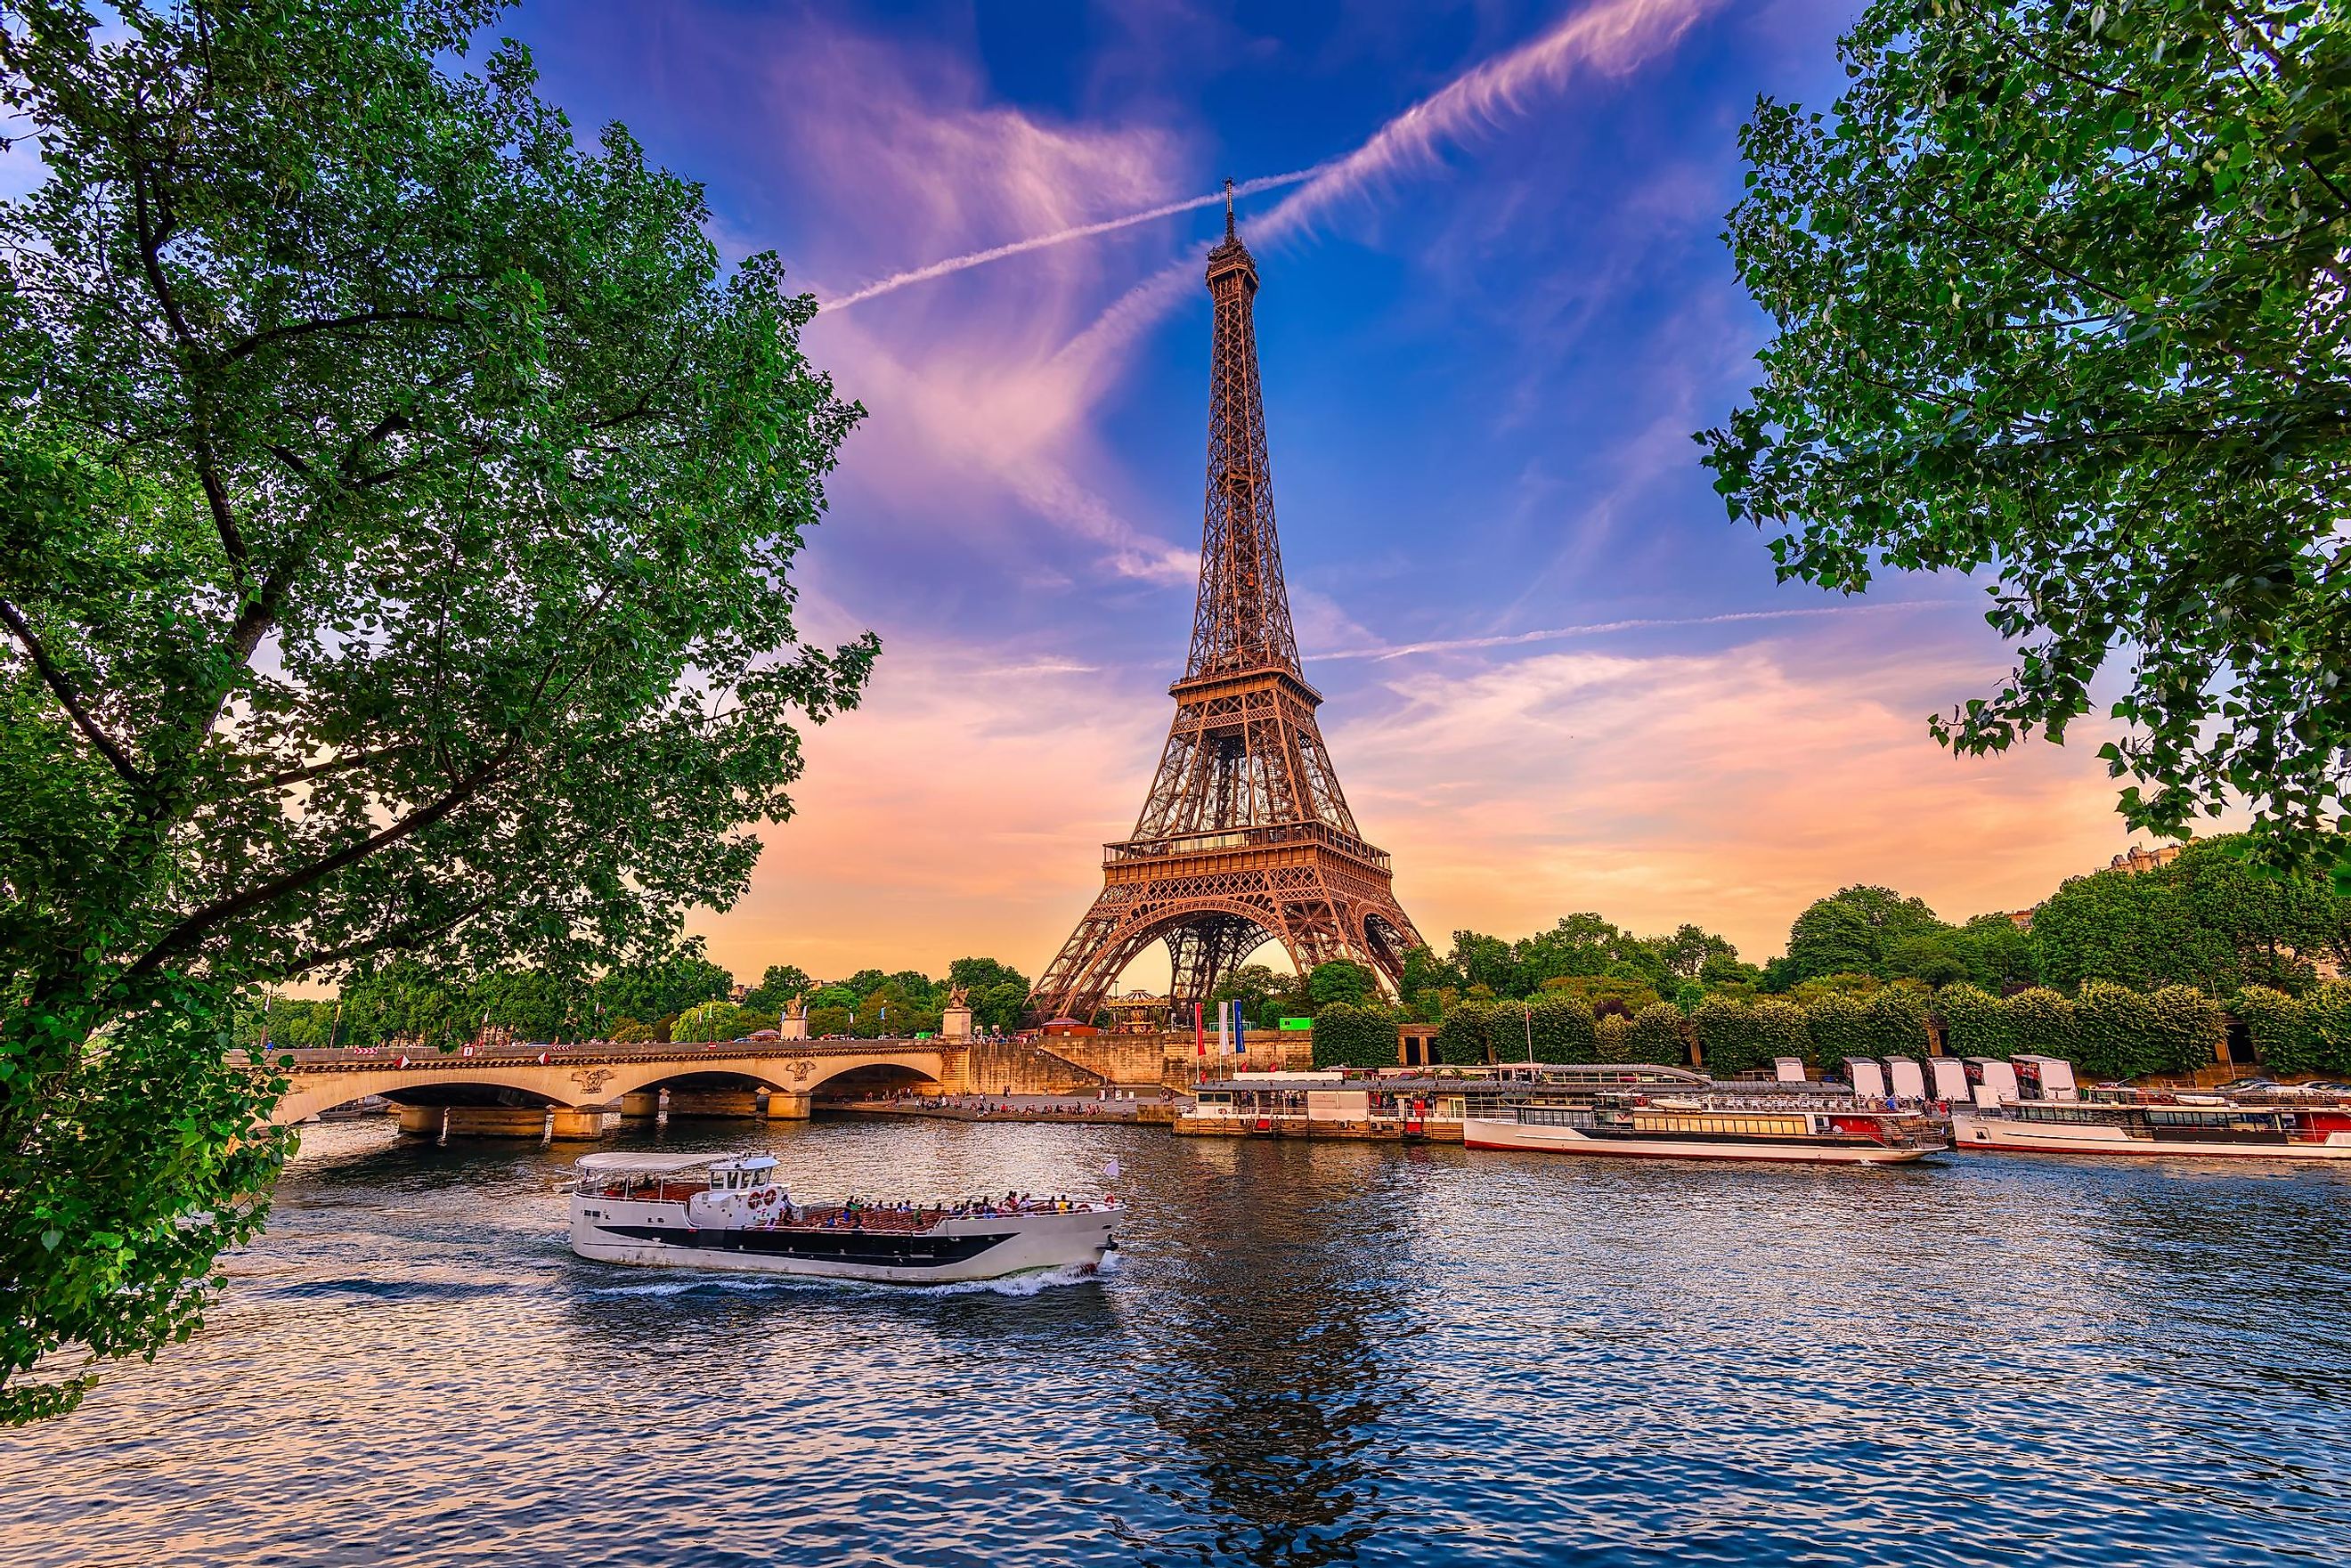 Paris, France is the most visited country in the world. Source: Shutterstock